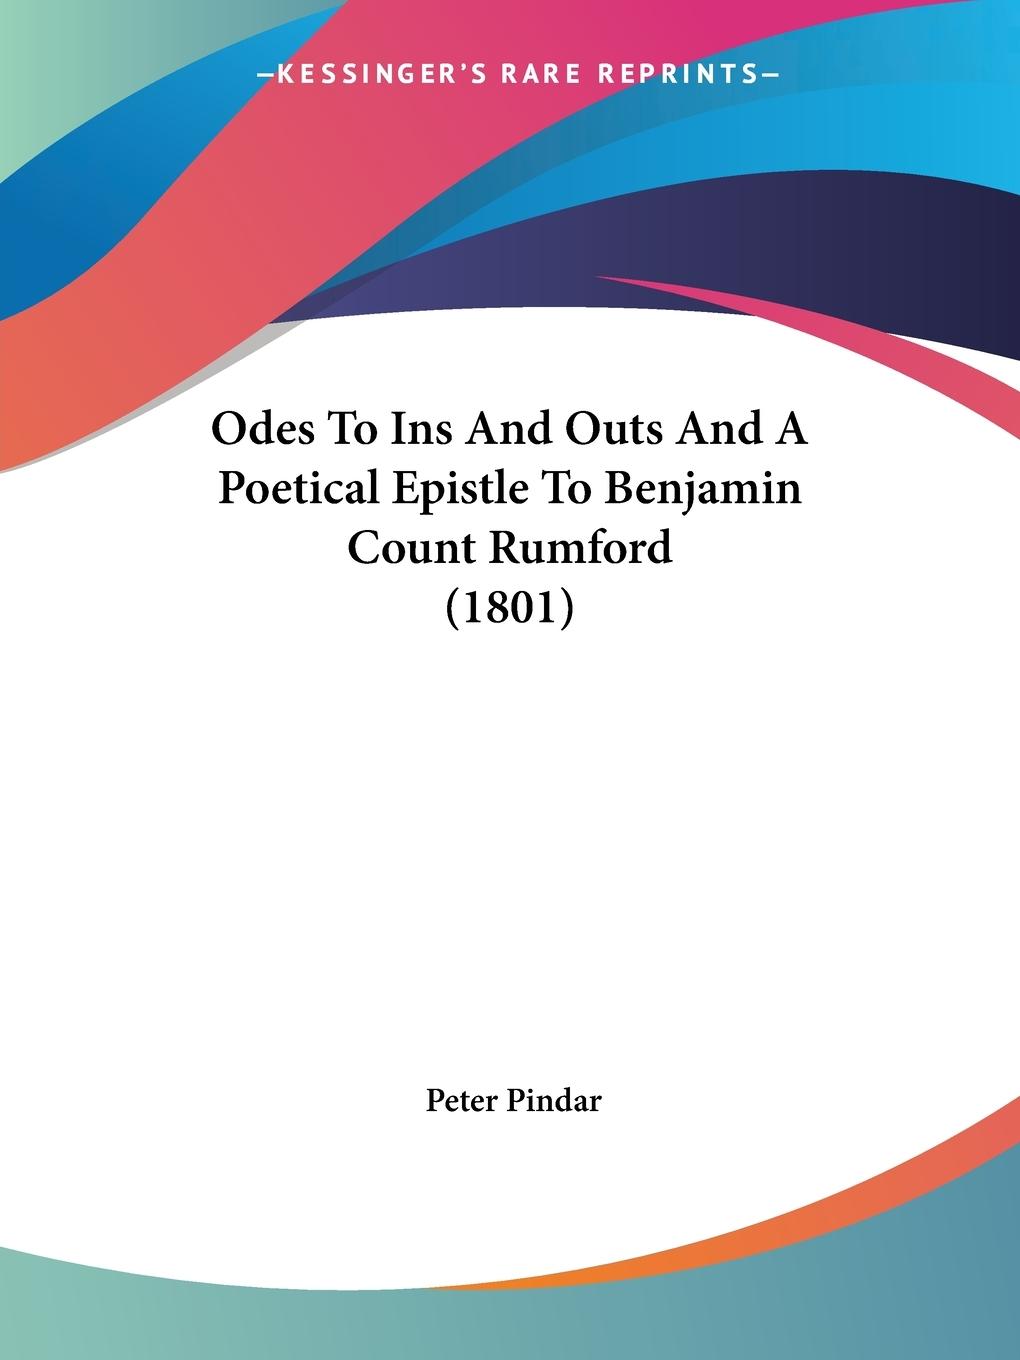 Odes To Ins And Outs And A Poetical Epistle To Benjamin Count Rumford (1801) - Pindar, Peter